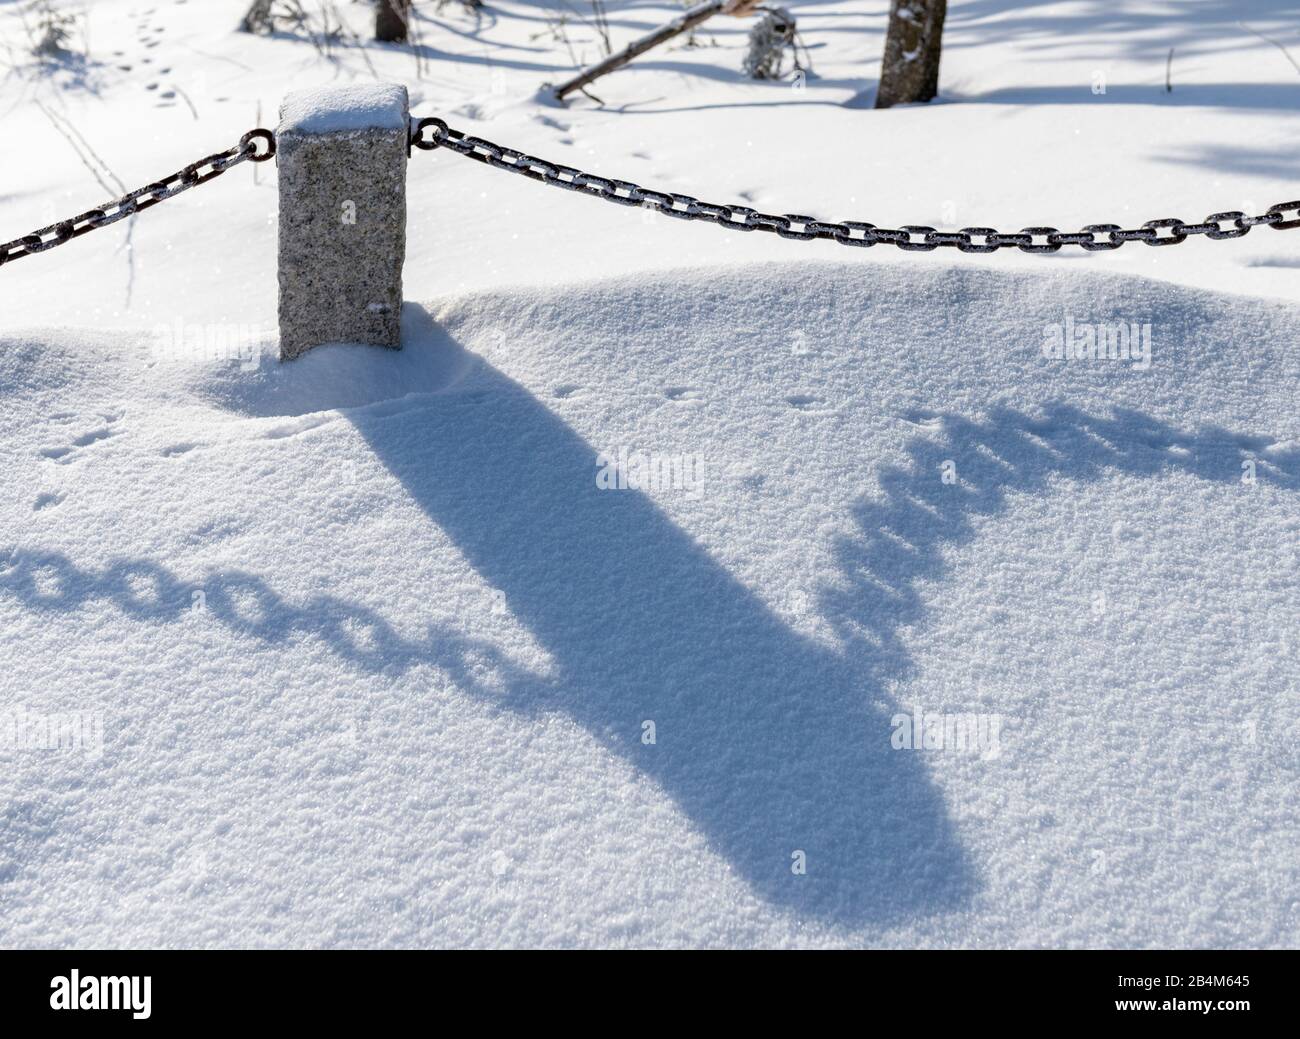 Germany, Baden-Württemberg, Black Forest, shadow play on a fence. Stock Photo